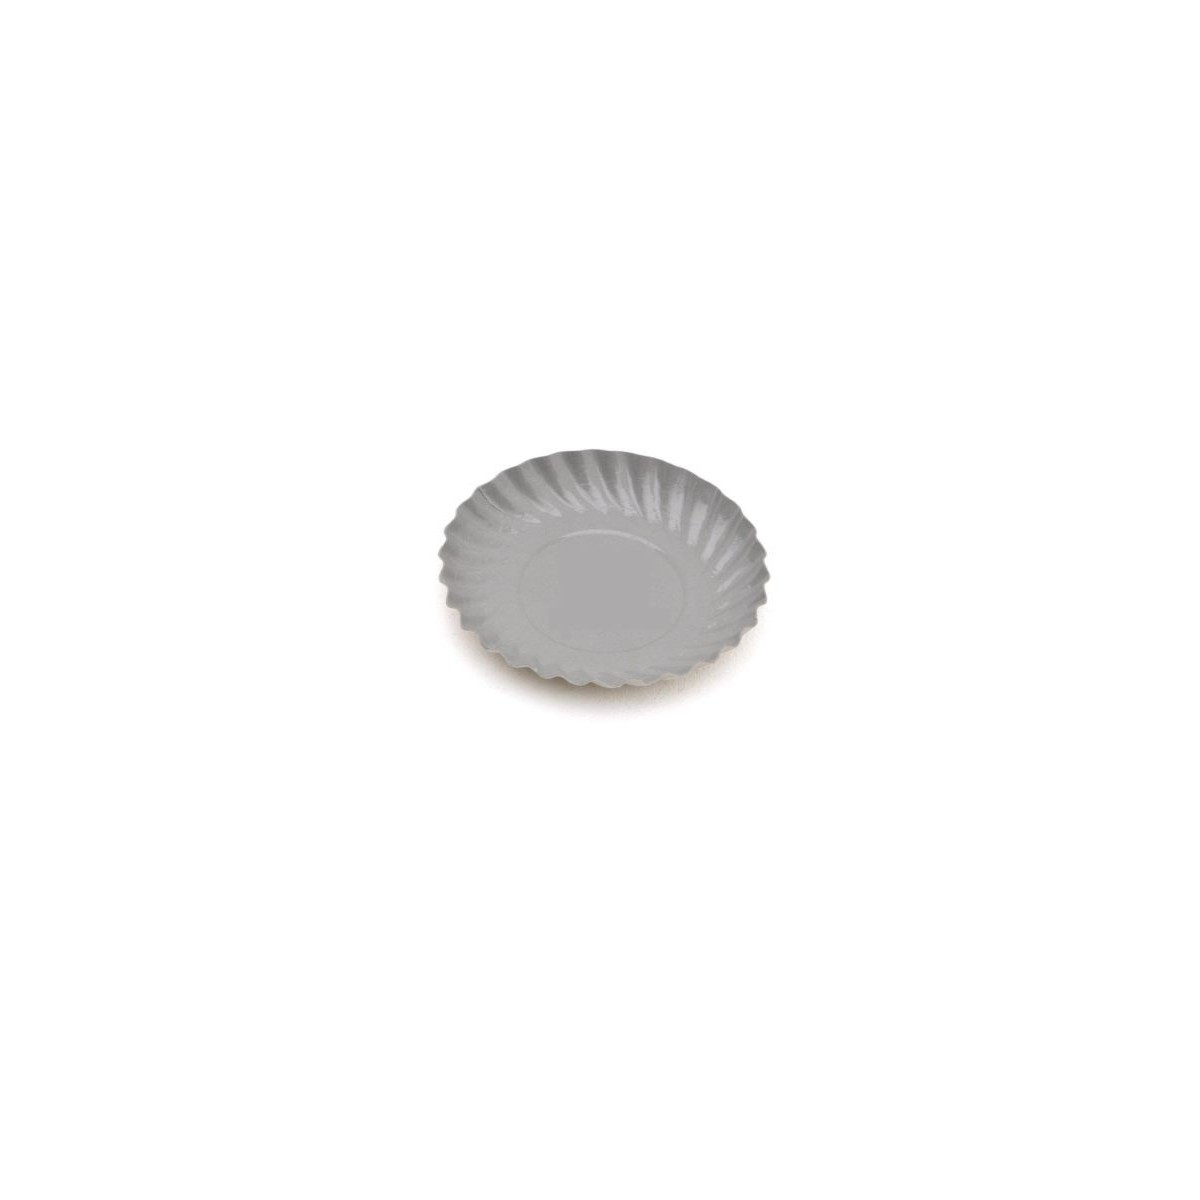 PLATE CARDBOARD ROUND SILVER Ø 88 MM 100 PIECES FOSTPLUS INCLUDED  PACKAGE 